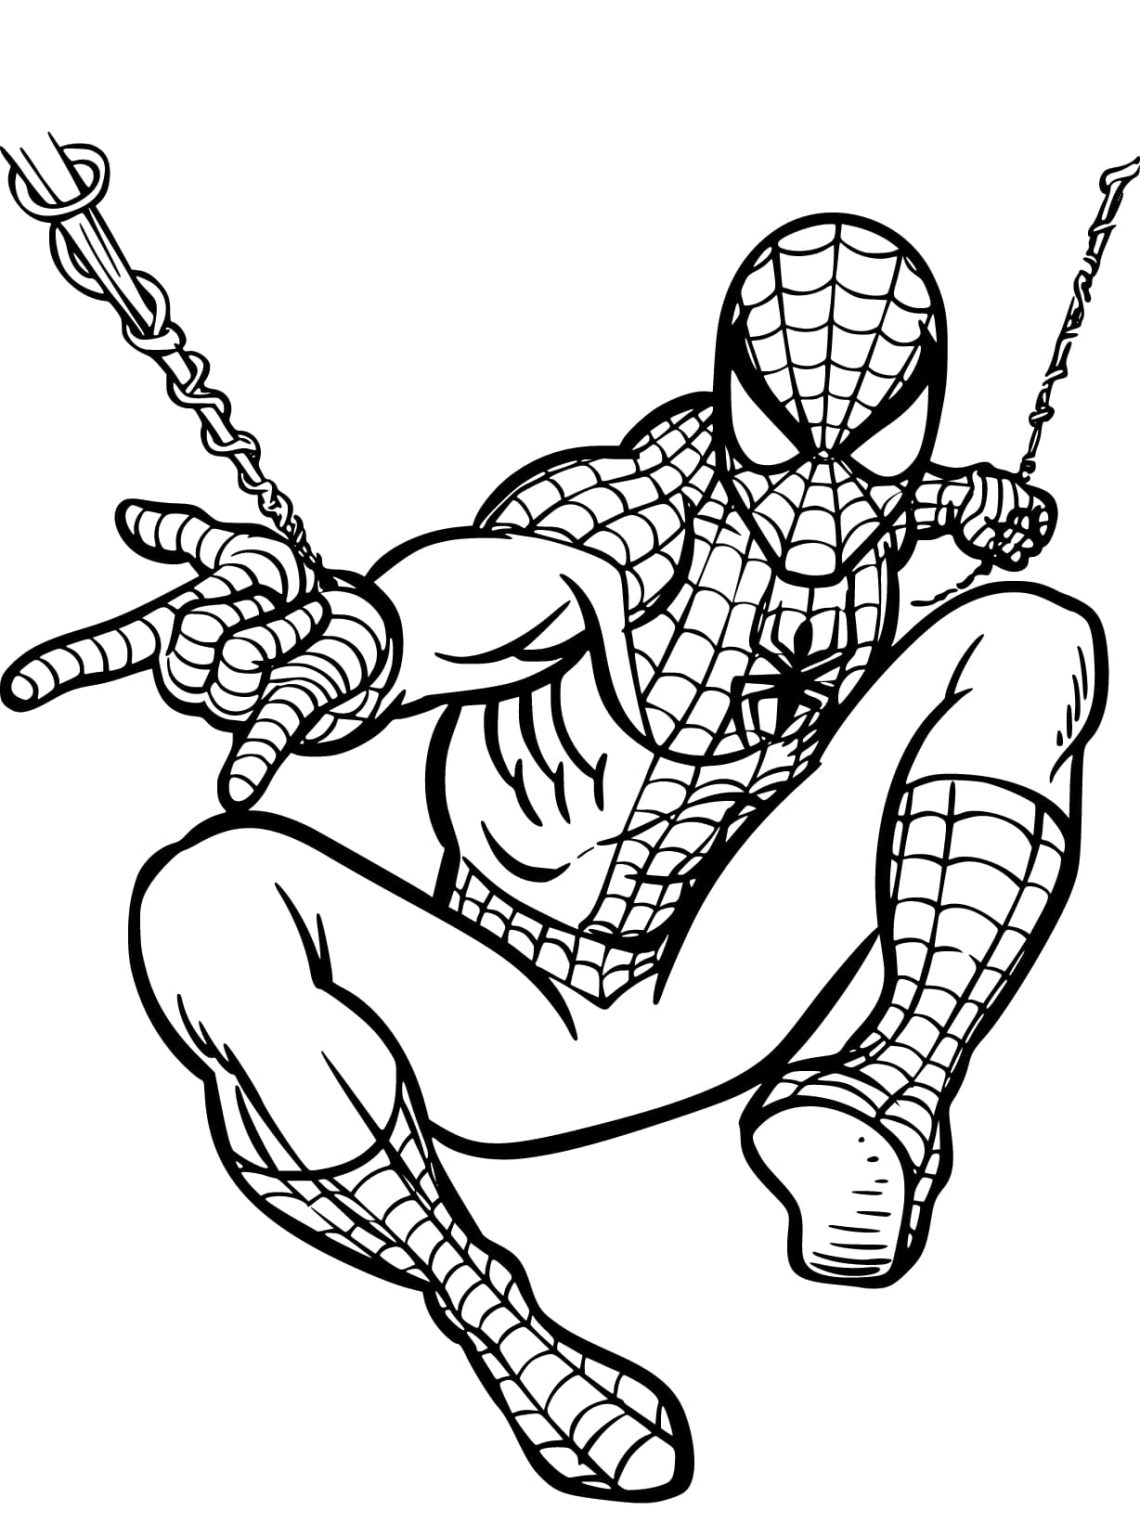 Explore our collection of pritable Spiderman coloring pages free